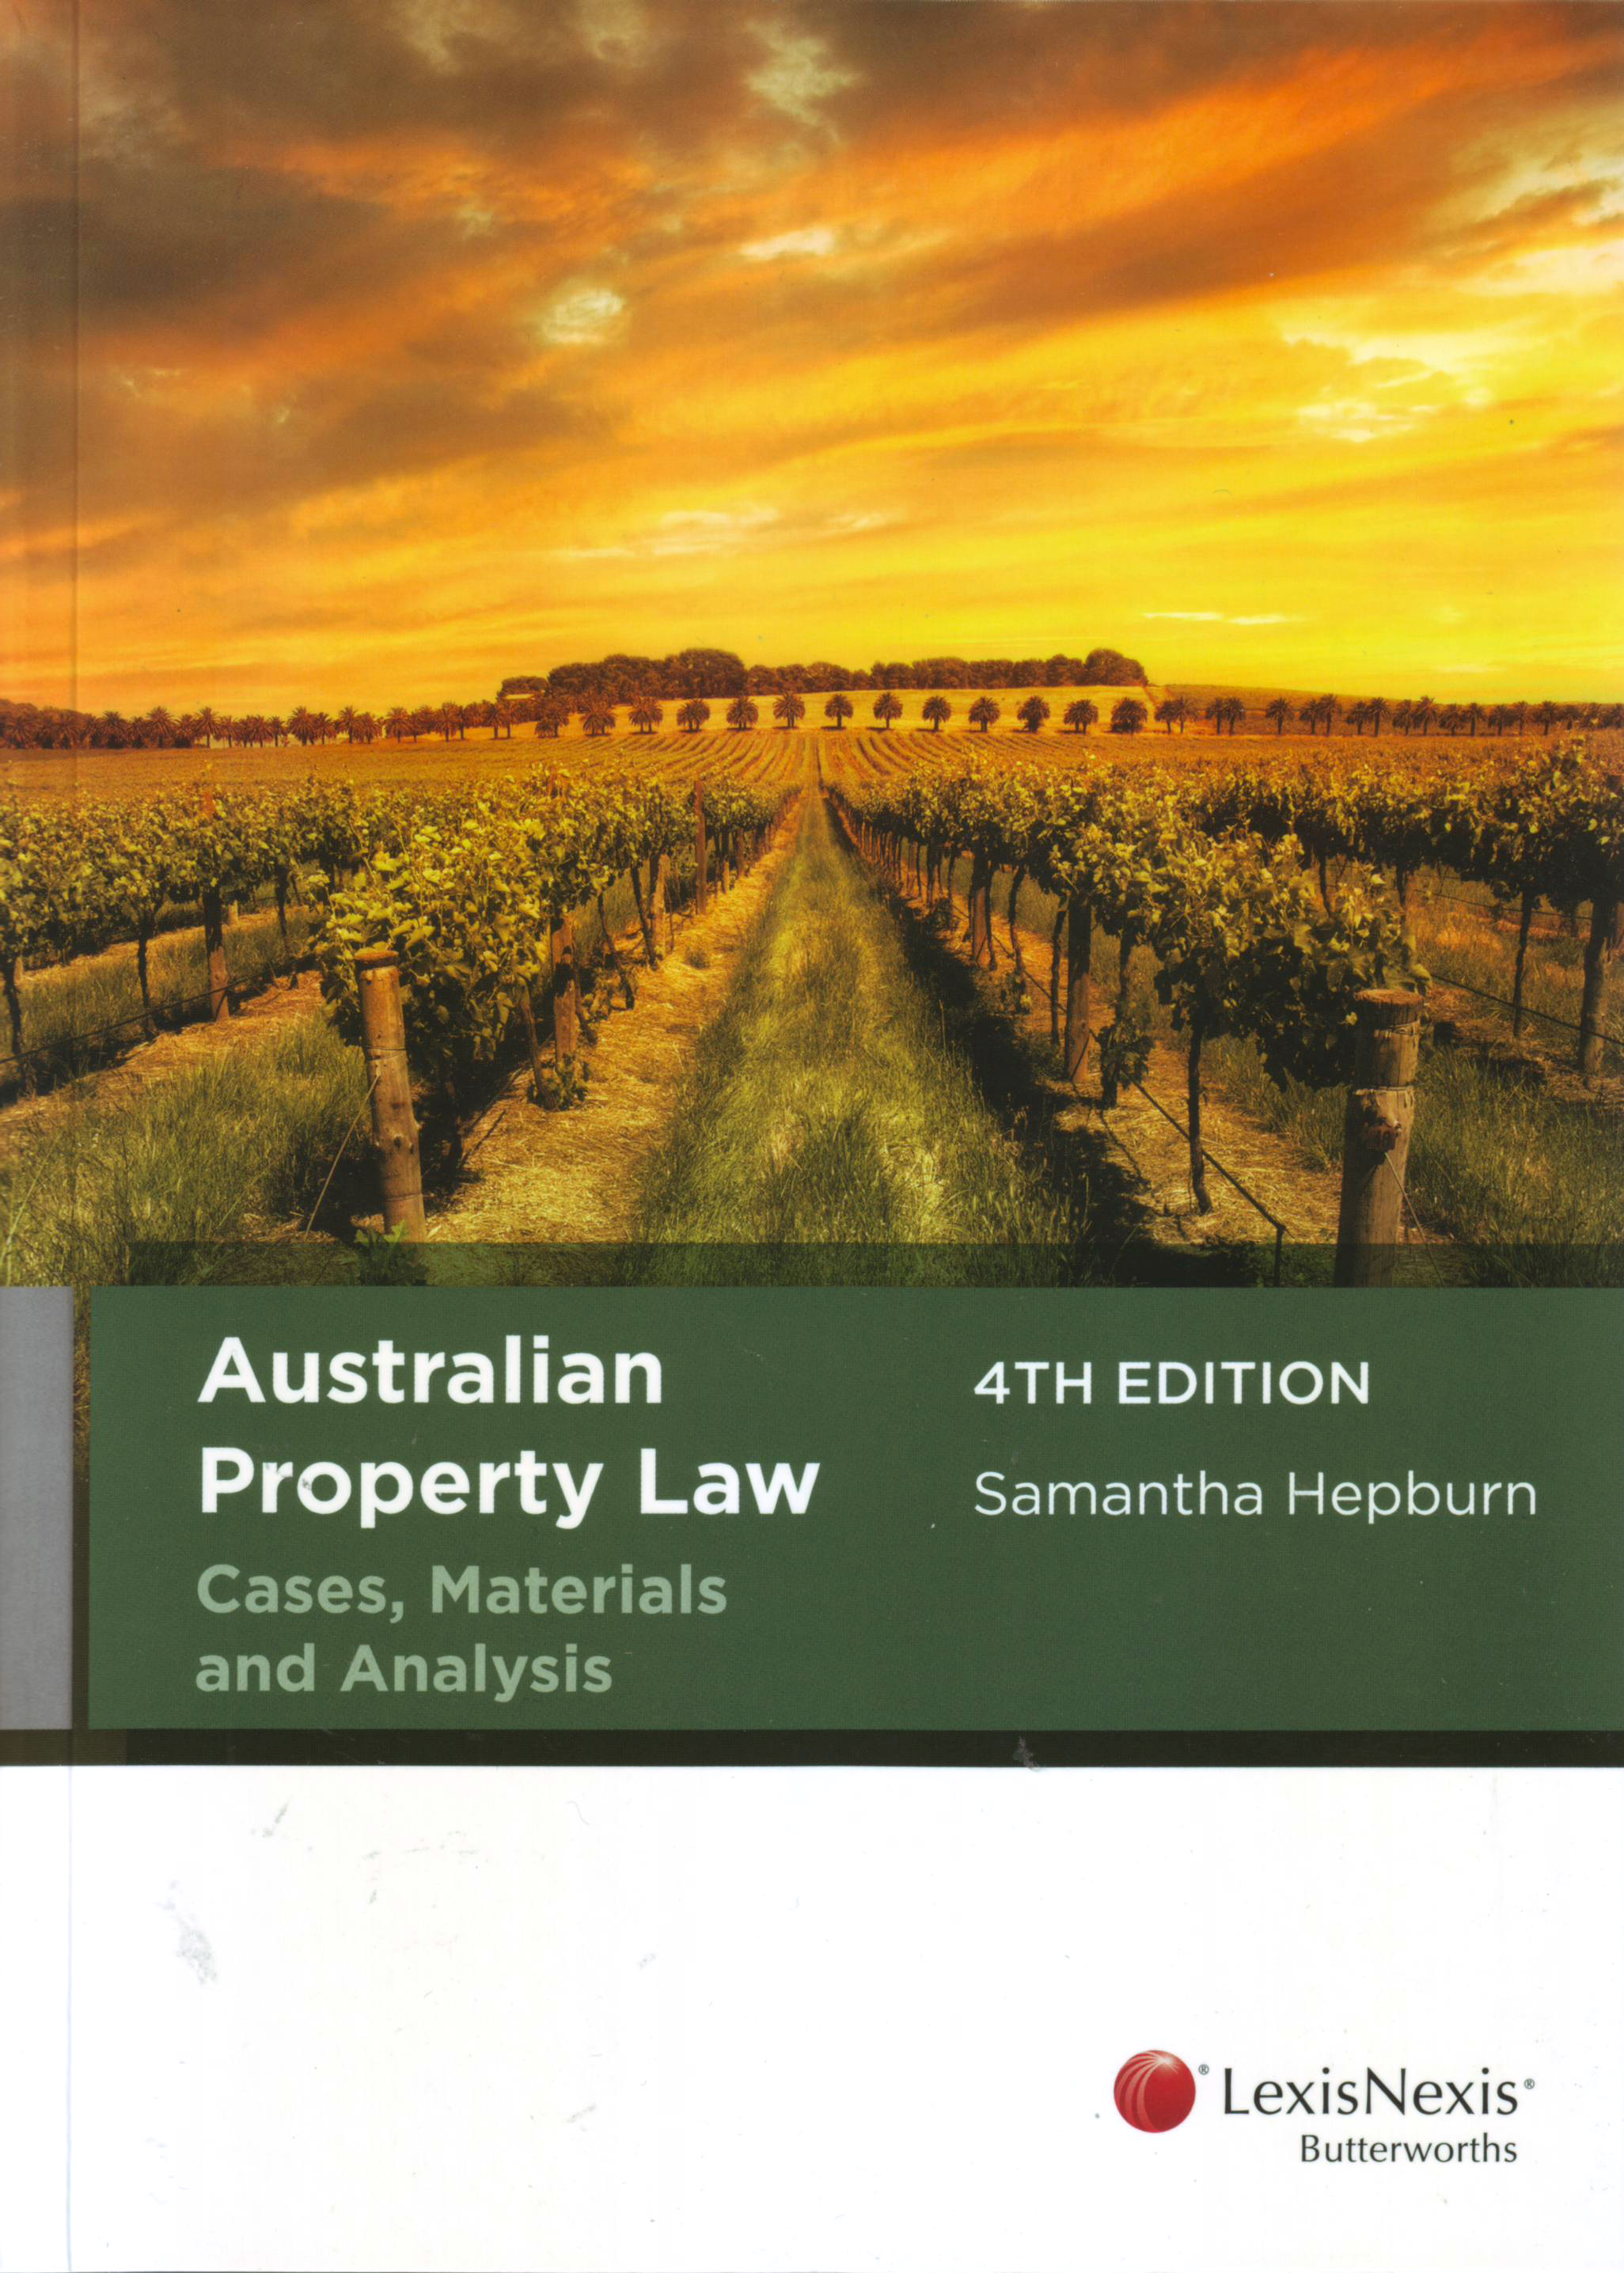 Australian Property Law Cases, Materials and Analysis e4